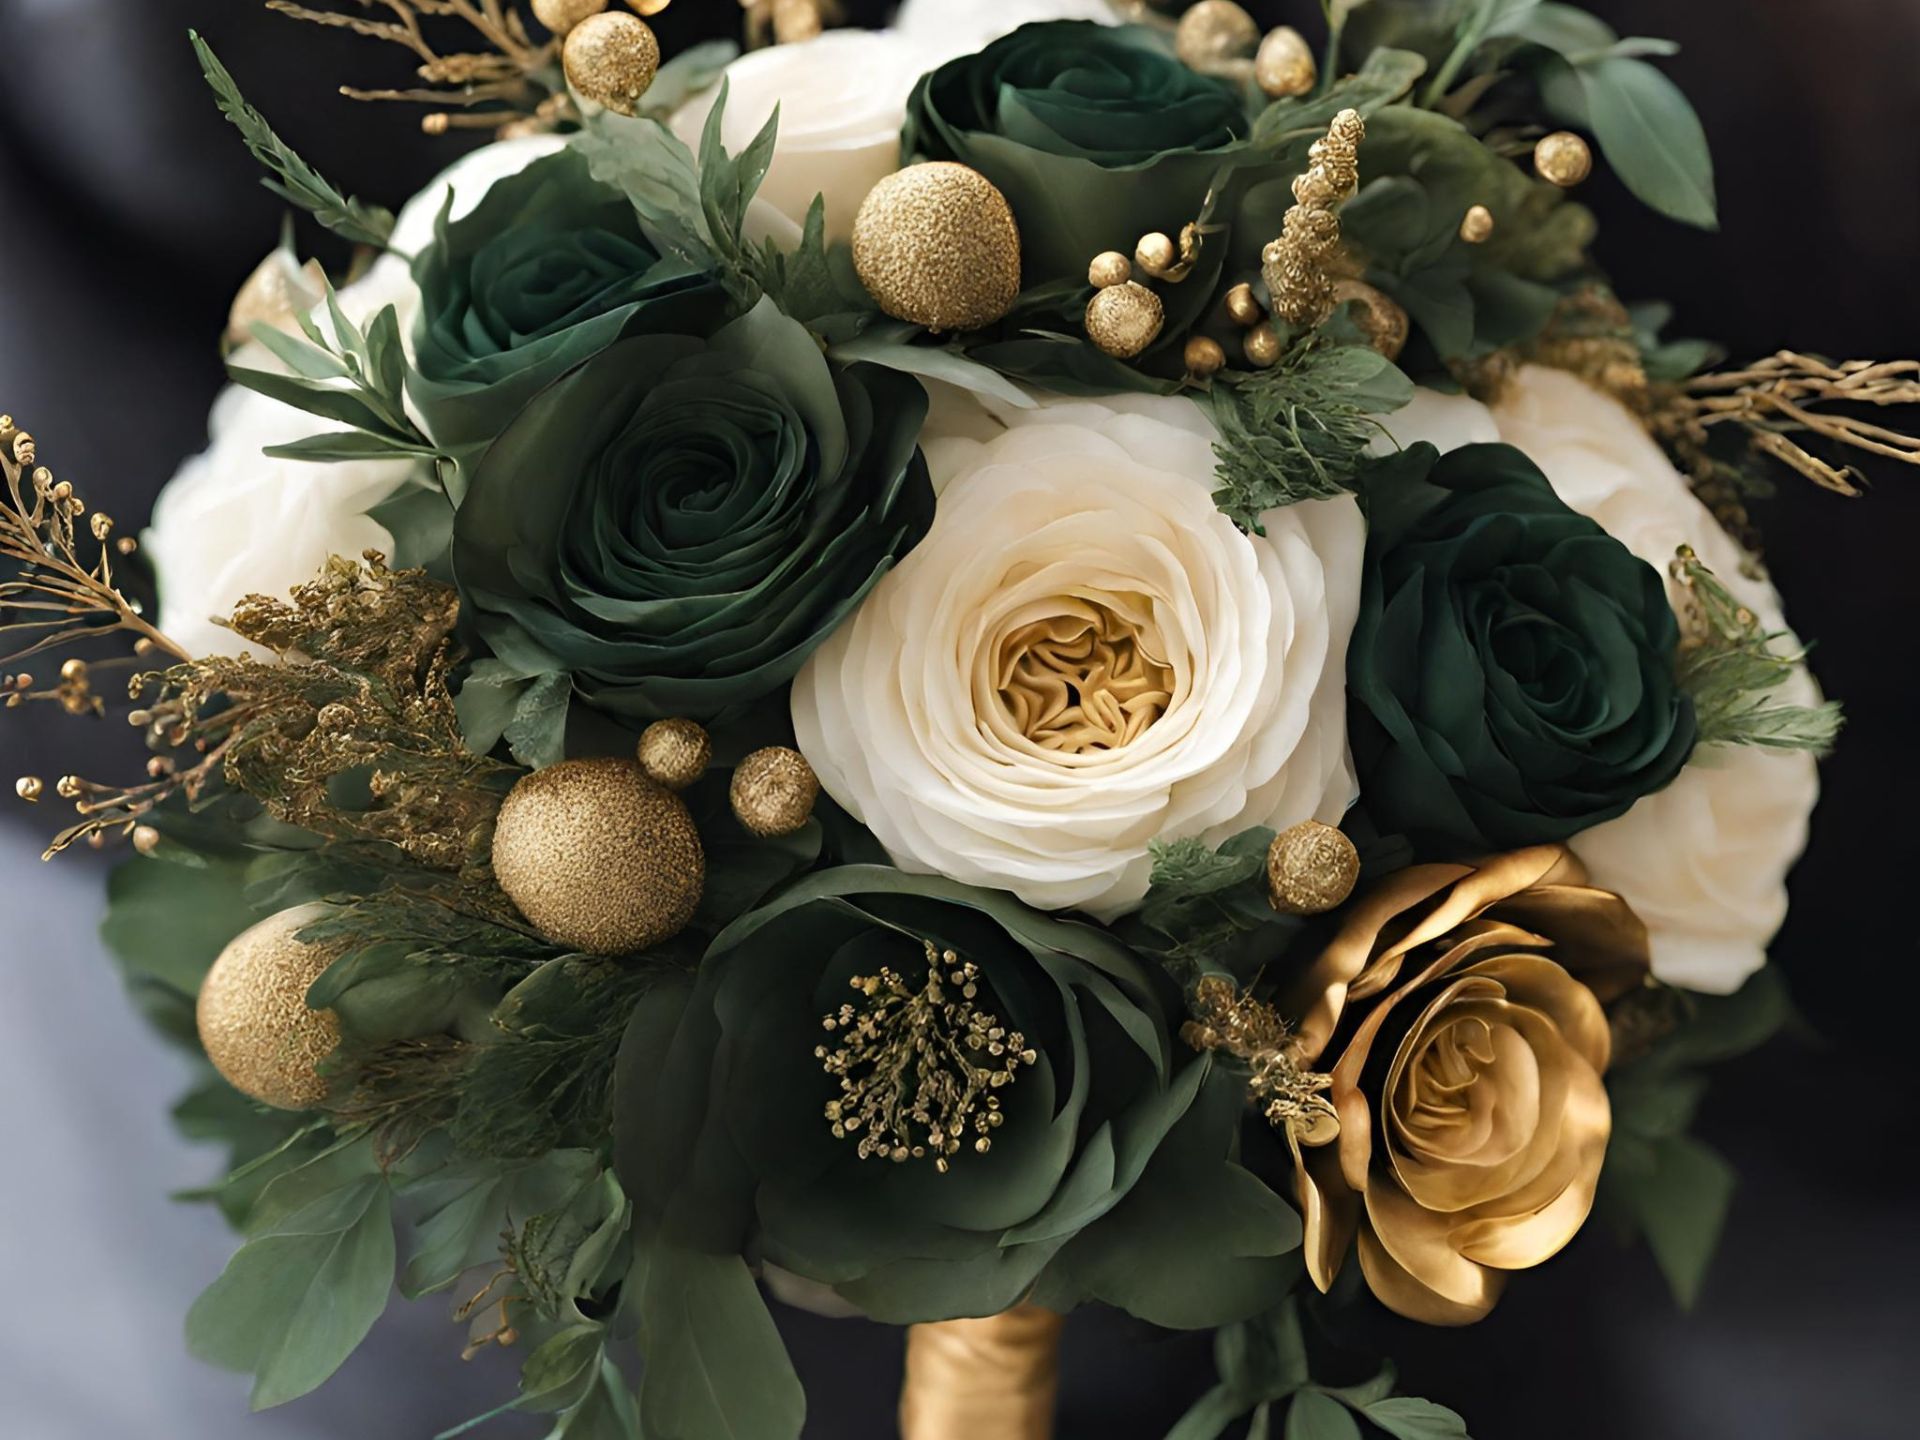 Green and gold wedding bouquet.